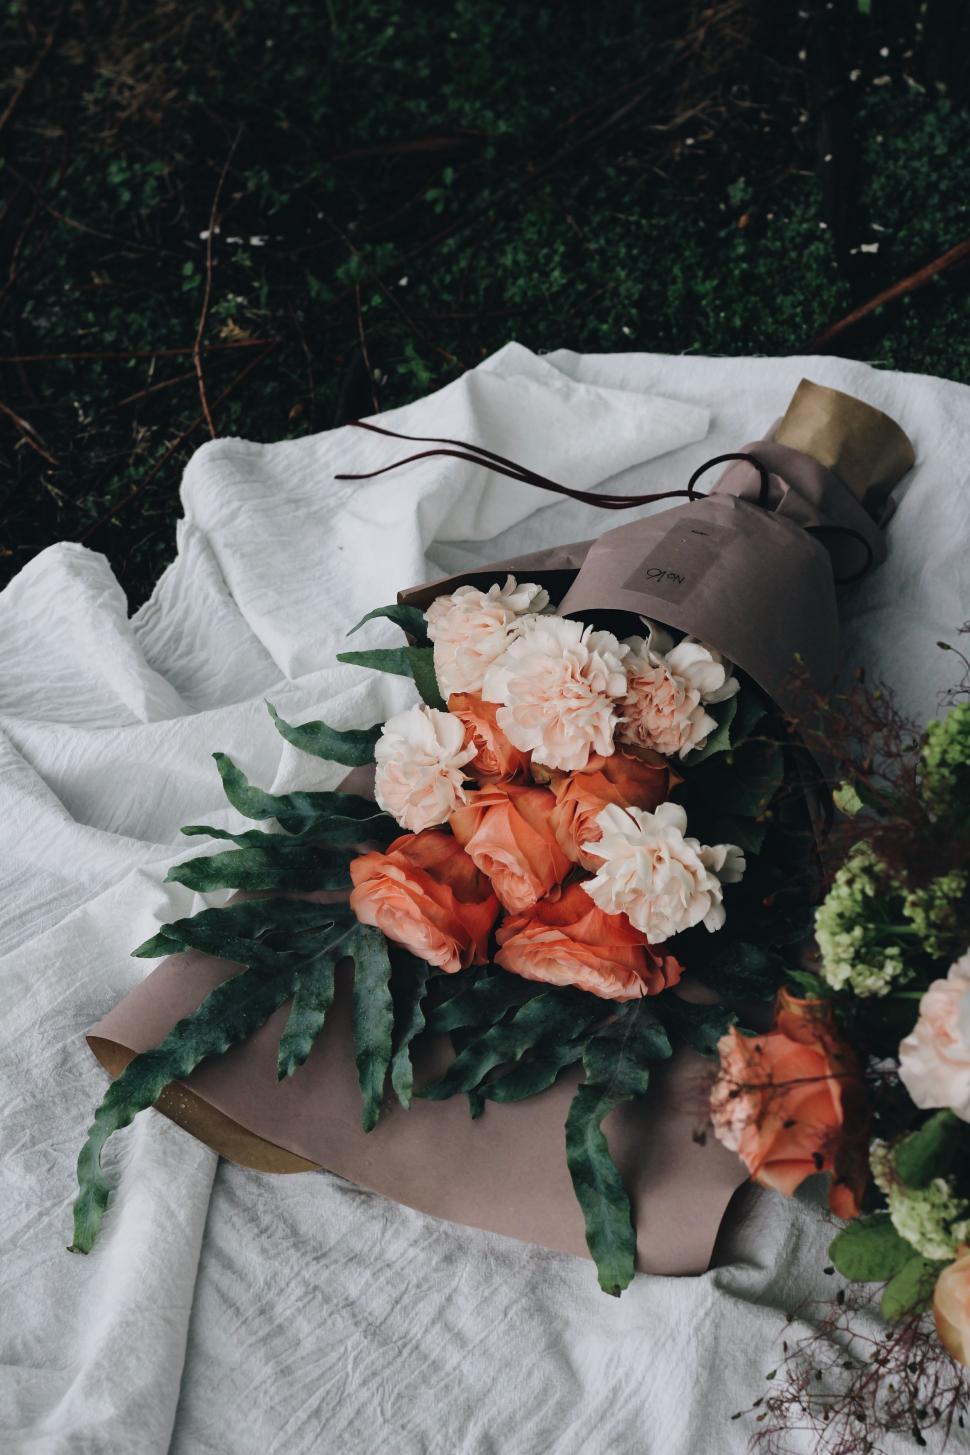 Free Image of Bouquet of Flowers Laying on Blanket 